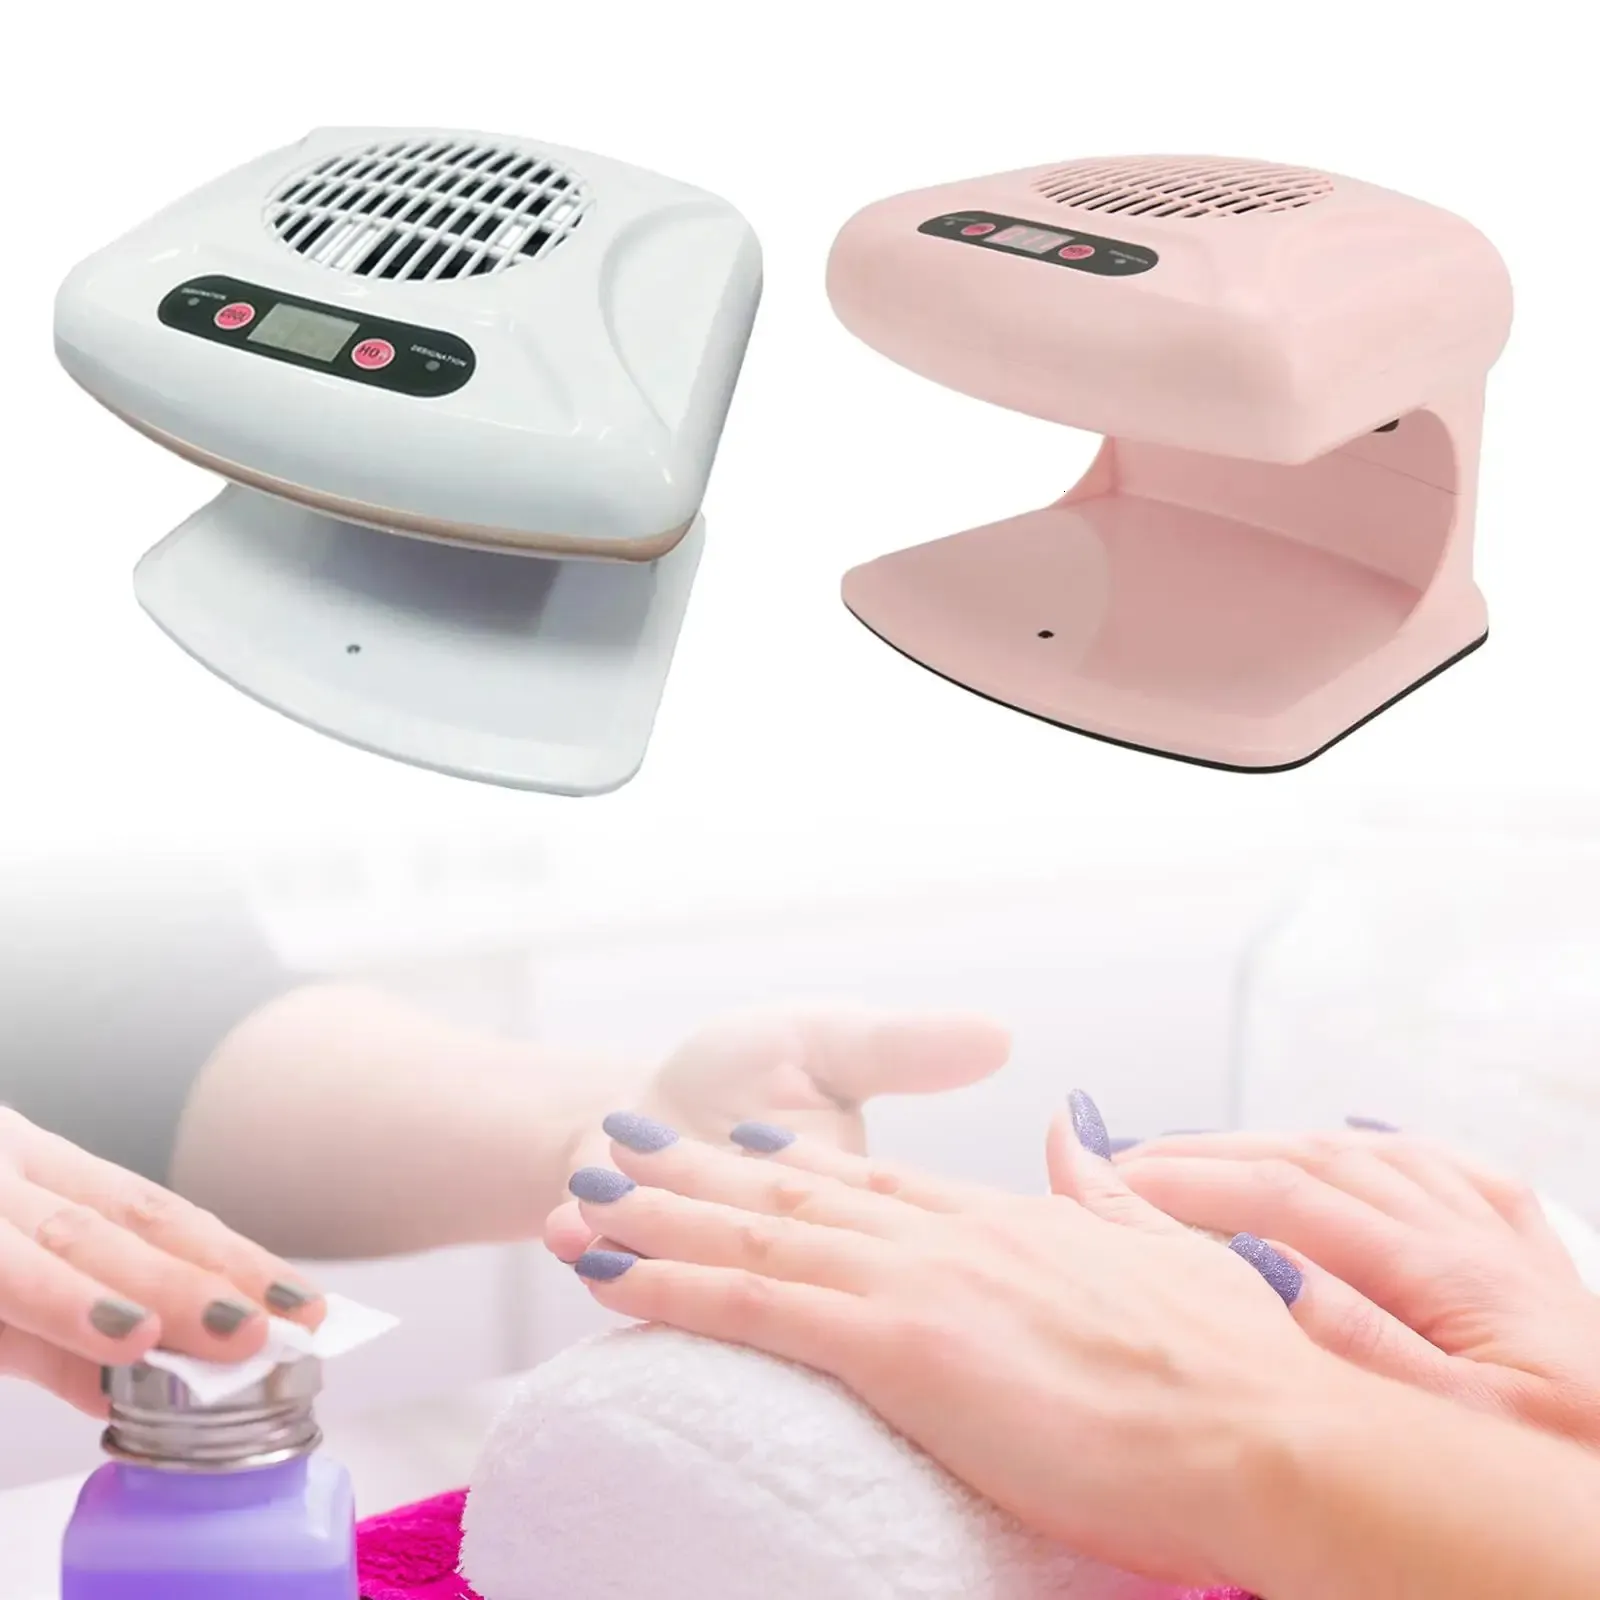 Air Nail Dryer Fan with Warm and cool wind Nail blow Dryer Machine for Fingernail Toenail Professional Salon and Home Use